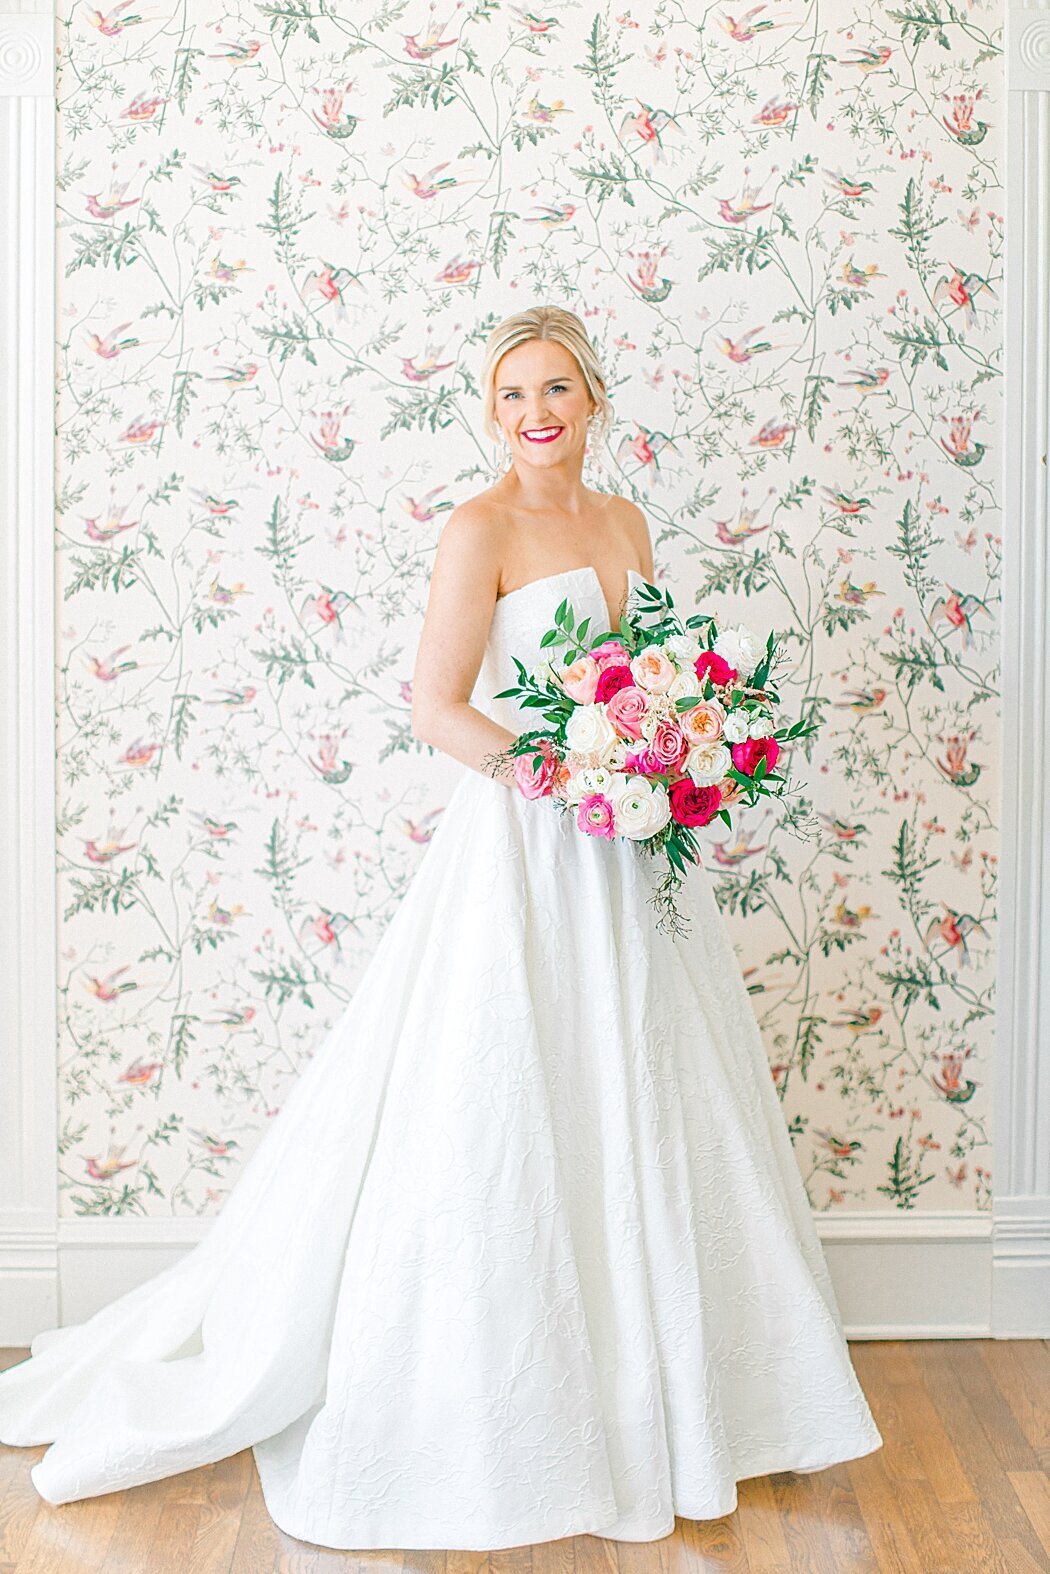 Woodbine Mansion wedding bridal photos by Allison Jeffers Photography in Round Rock Texas_0015